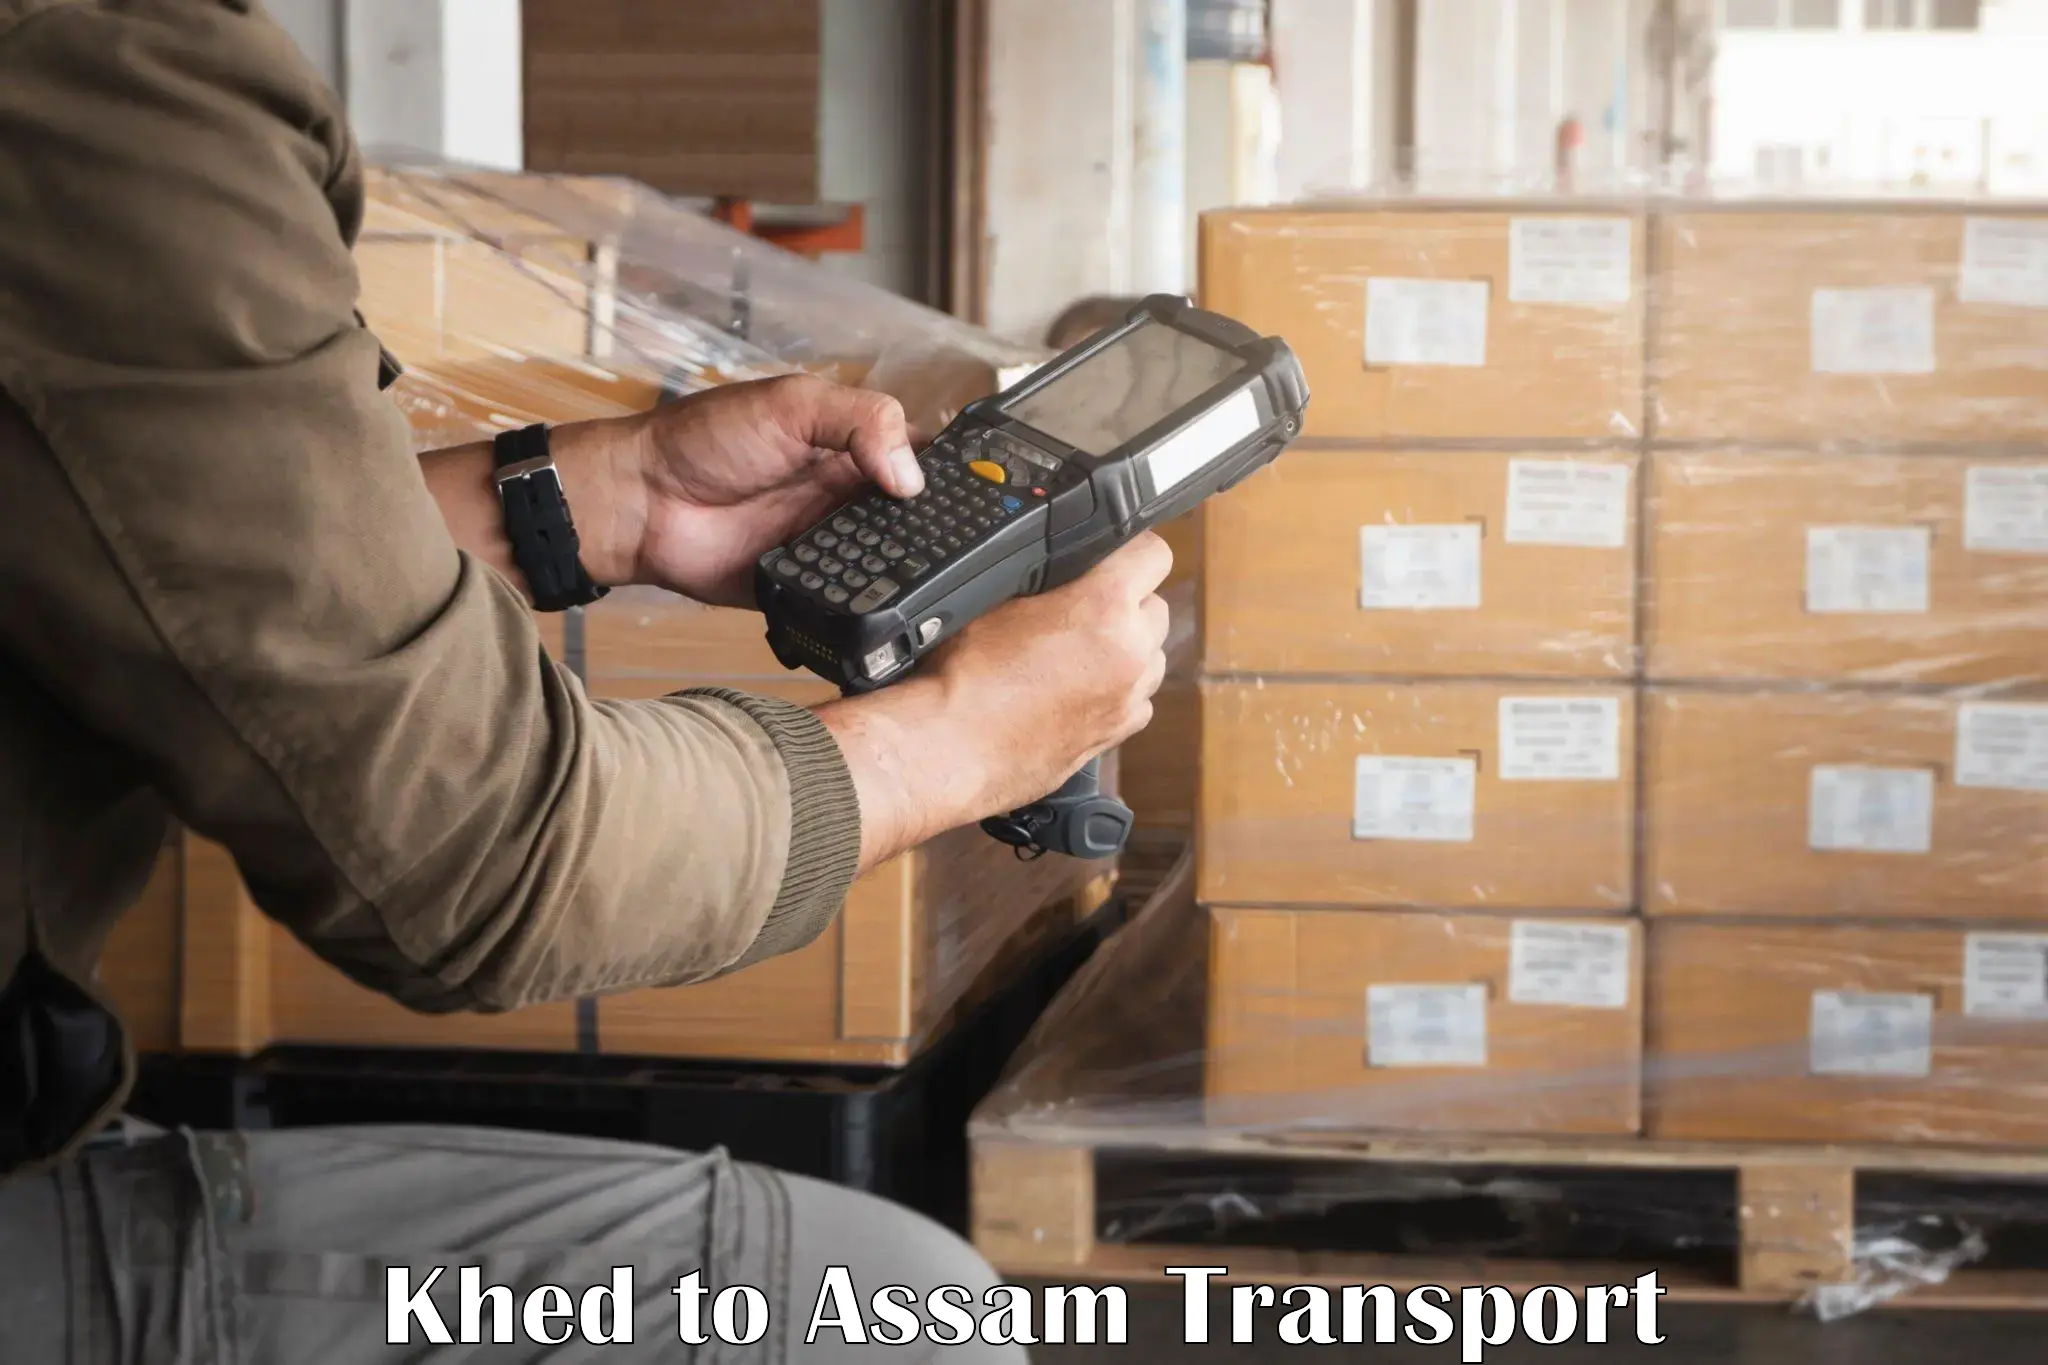 Daily transport service Khed to Assam